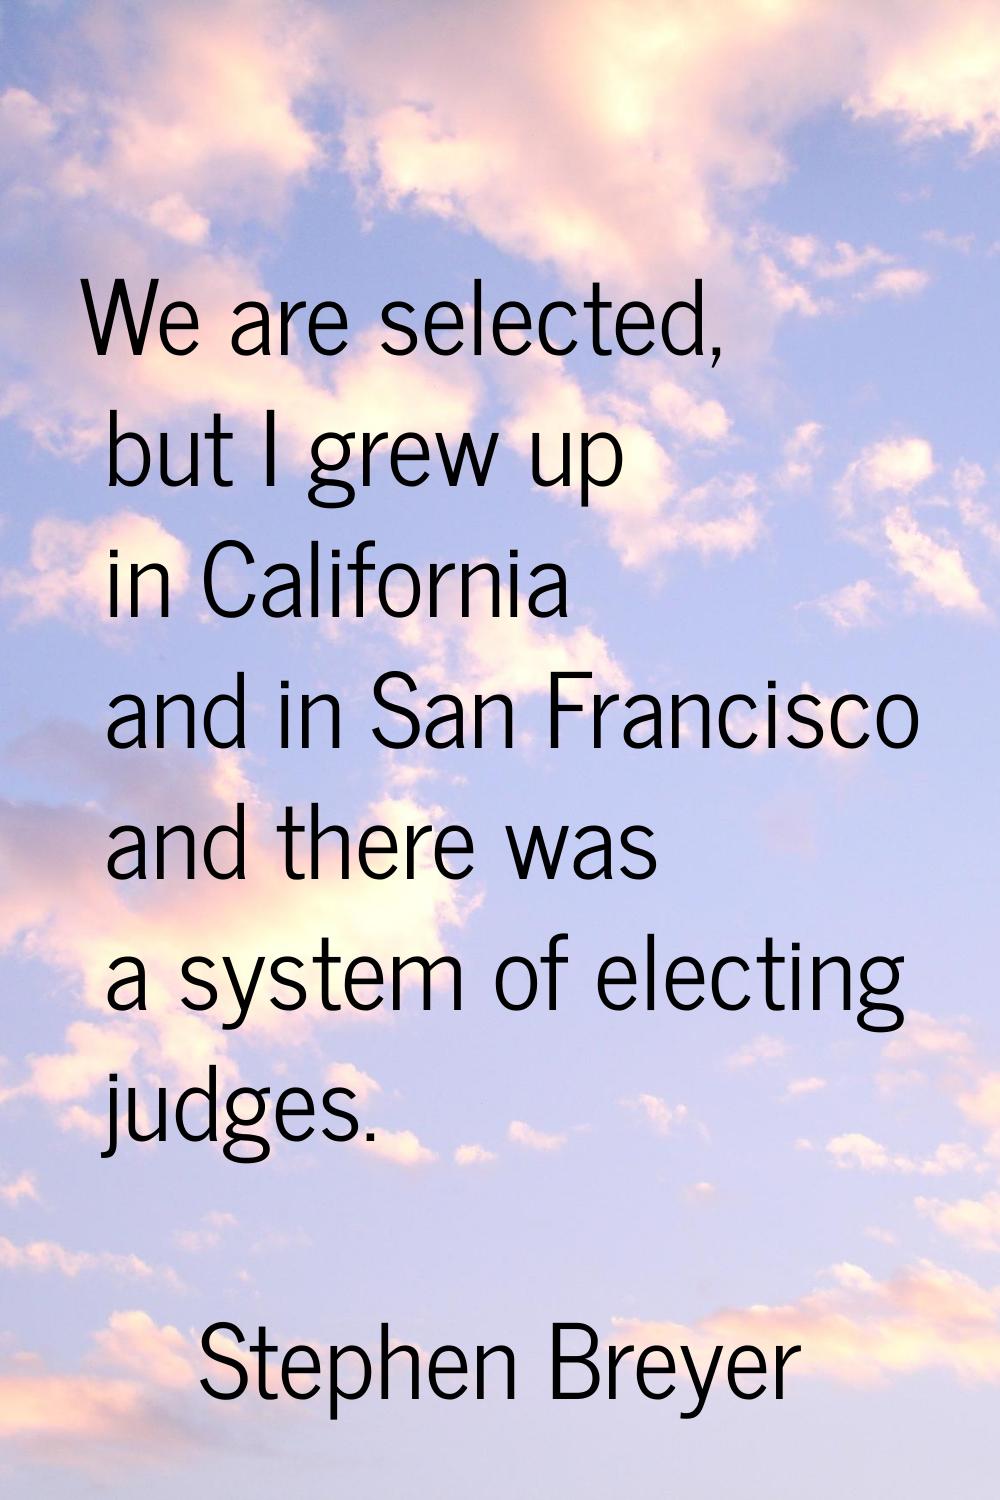 We are selected, but I grew up in California and in San Francisco and there was a system of electin